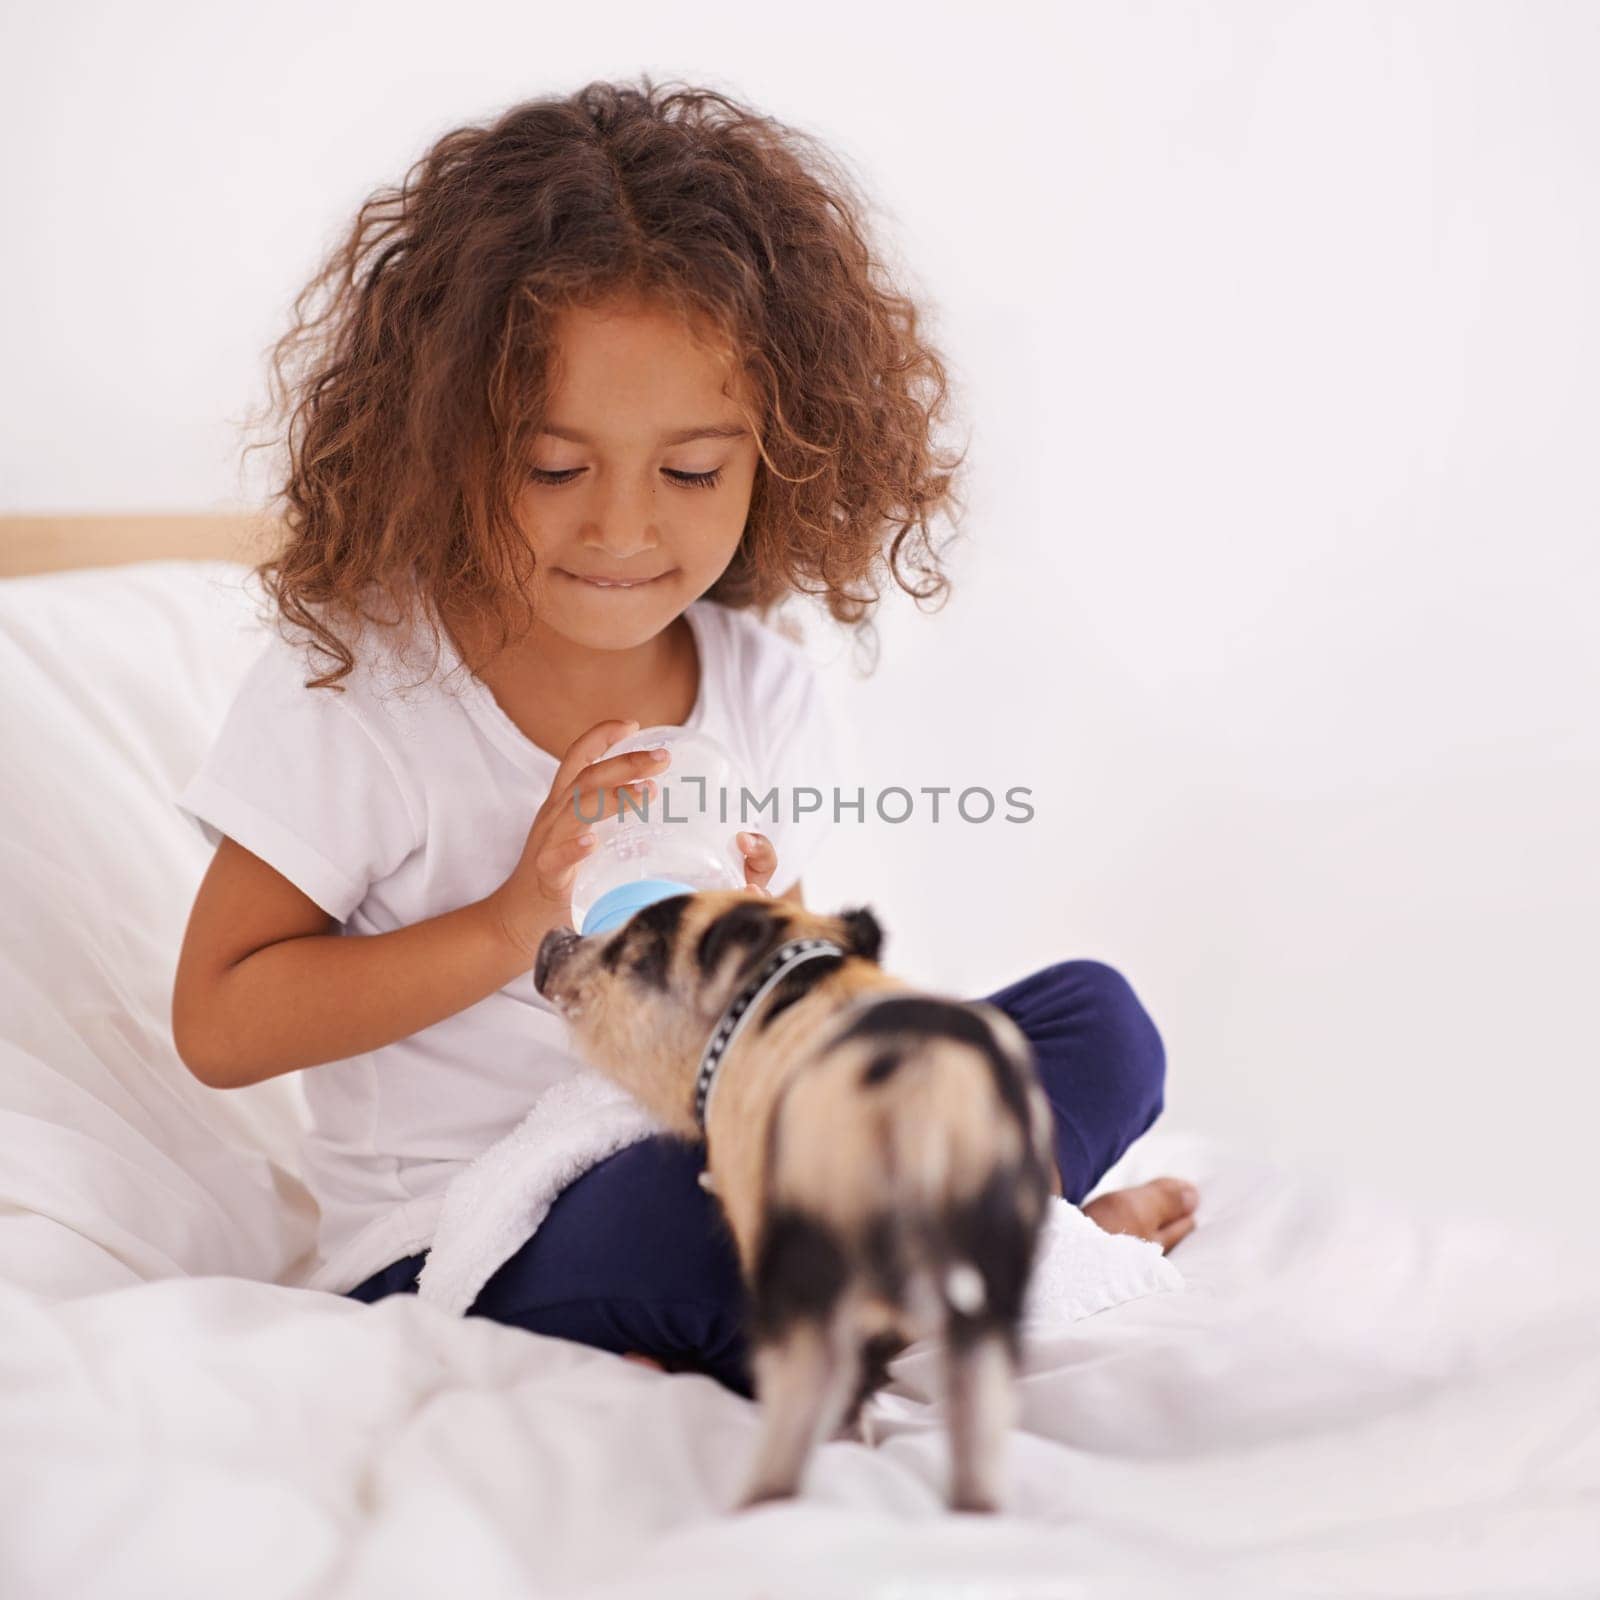 Child, piglet and feeding bottle for food in home, pet care and liquid nutrition on bed in bedroom. Female person, girl and learn responsibility in childhood, love and relax by animal with formula.